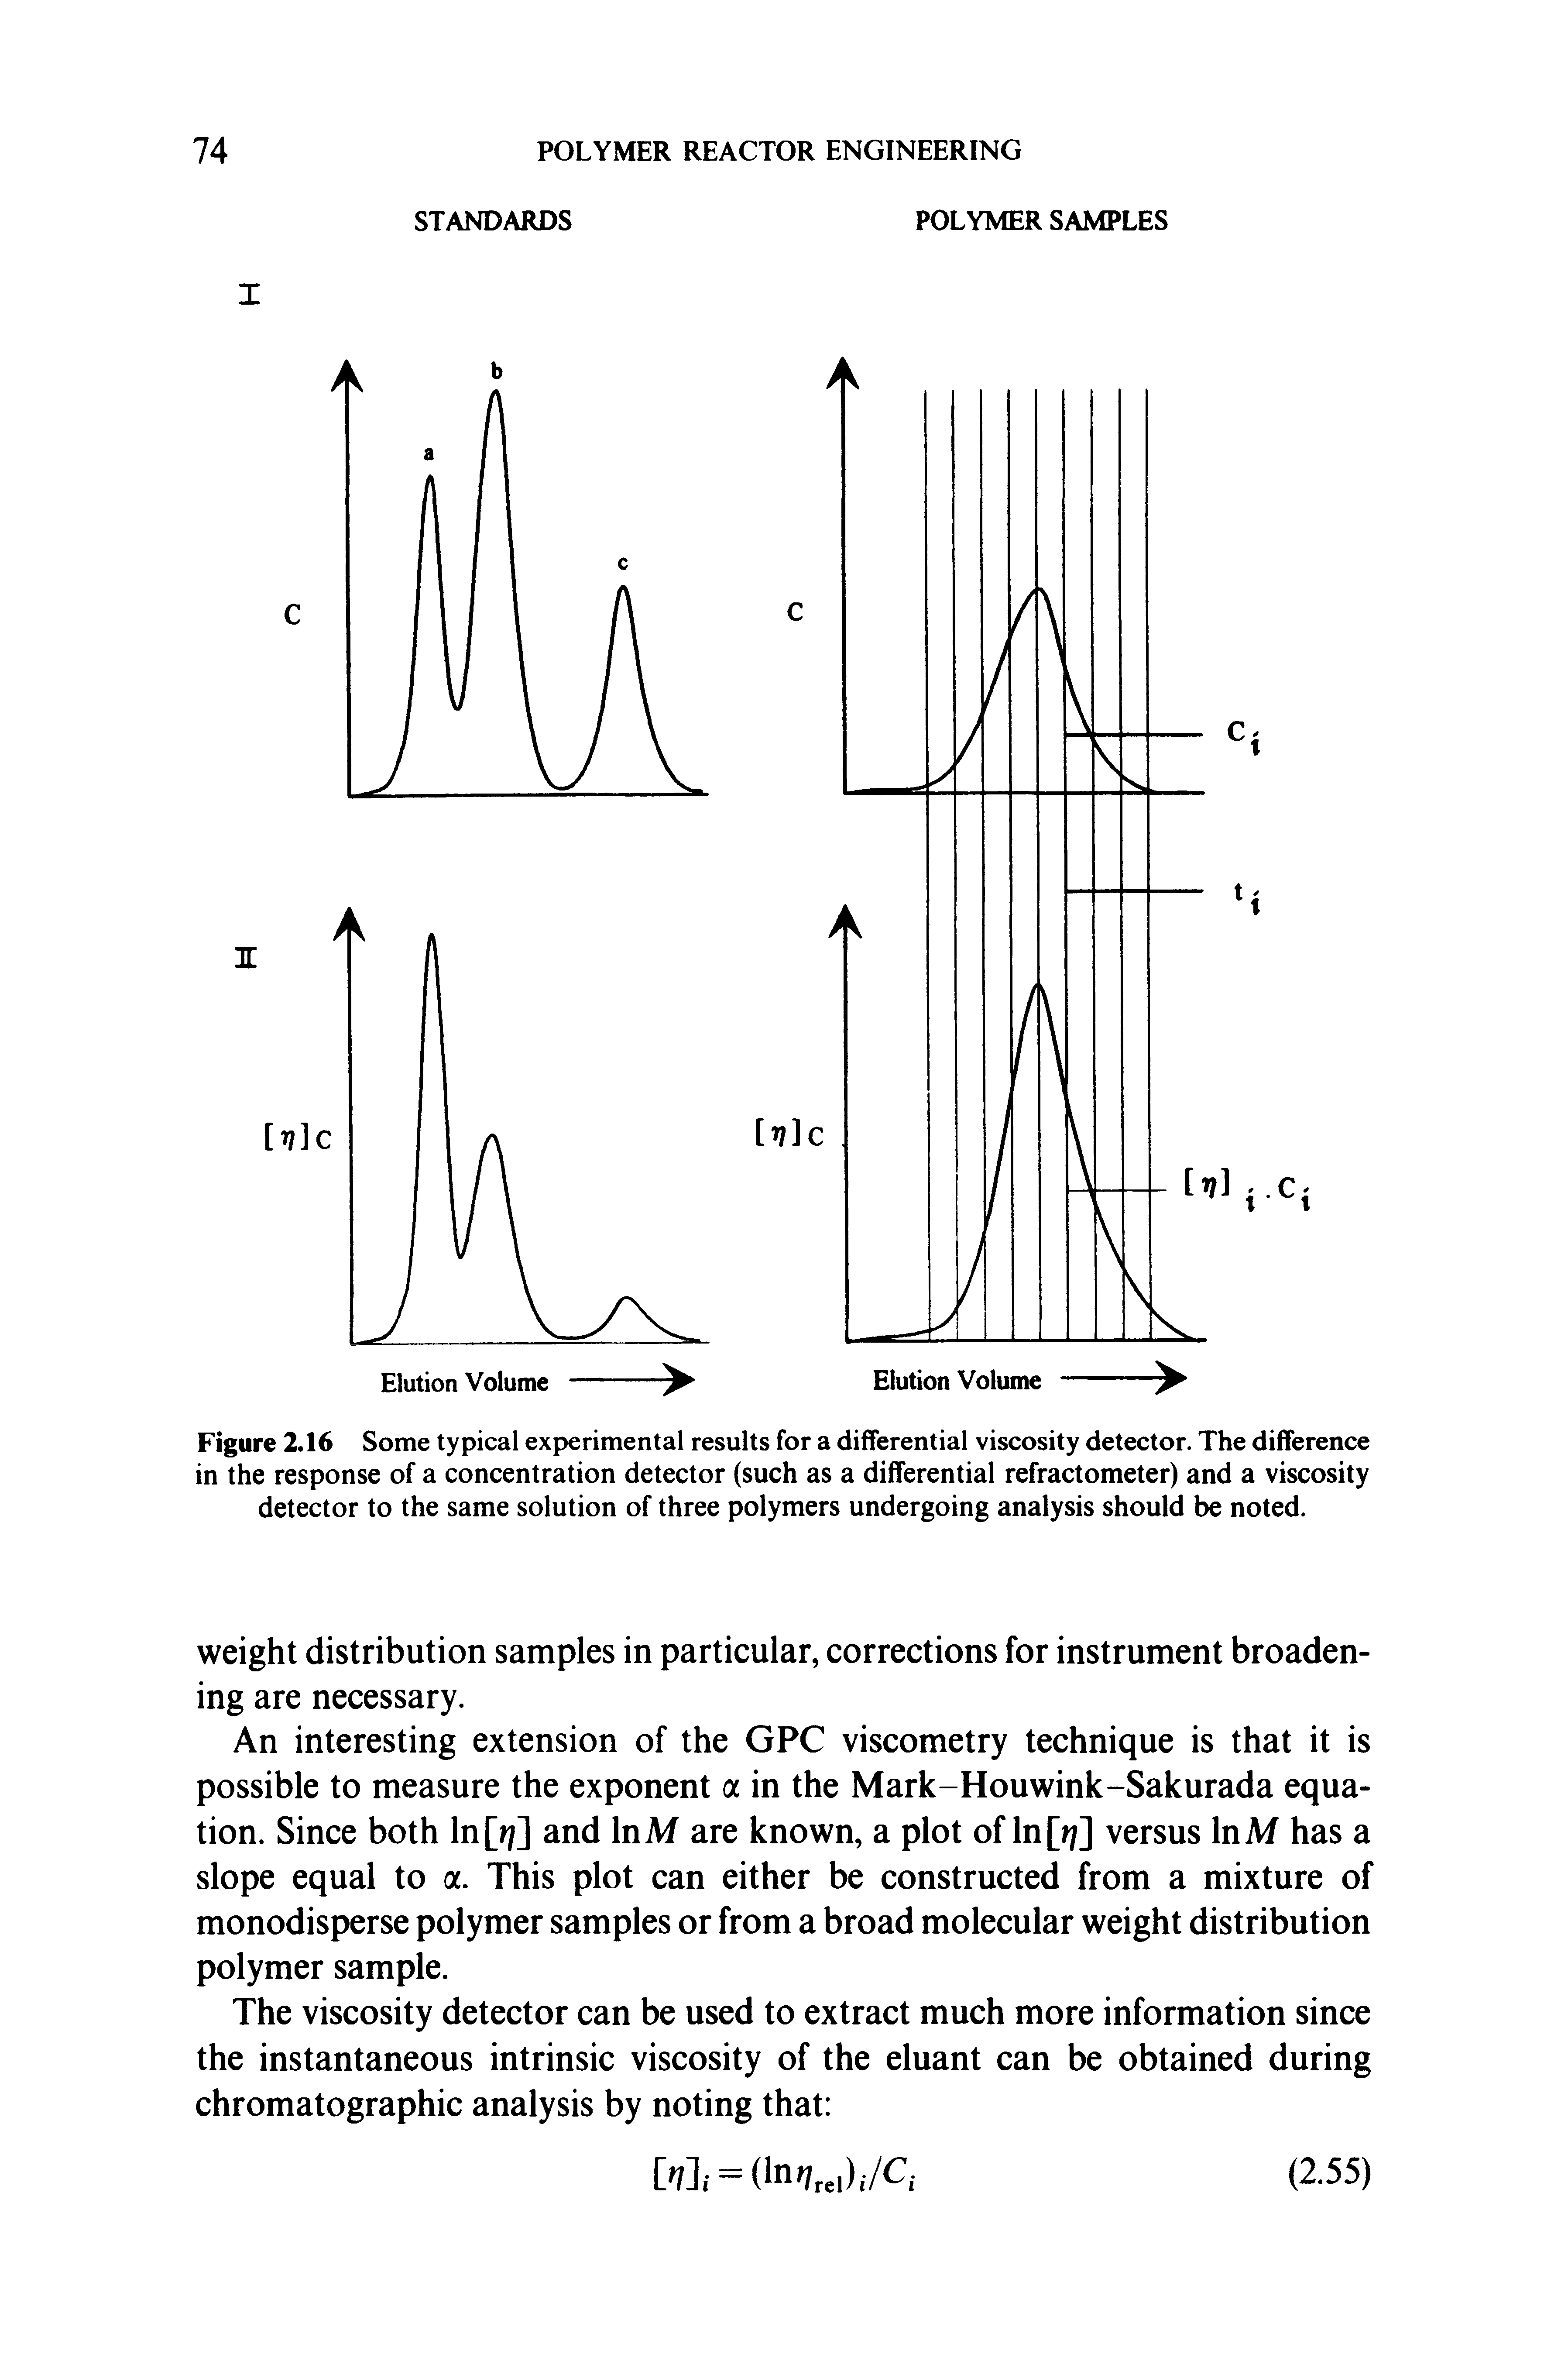 Figure 2.16 Some typical experimental results for a differential viscosity detector. The difference in the response of a concentration detector (such as a differential refractometer) and a viscosity detector to the same solution of three polymers undergoing analysis should be noted.